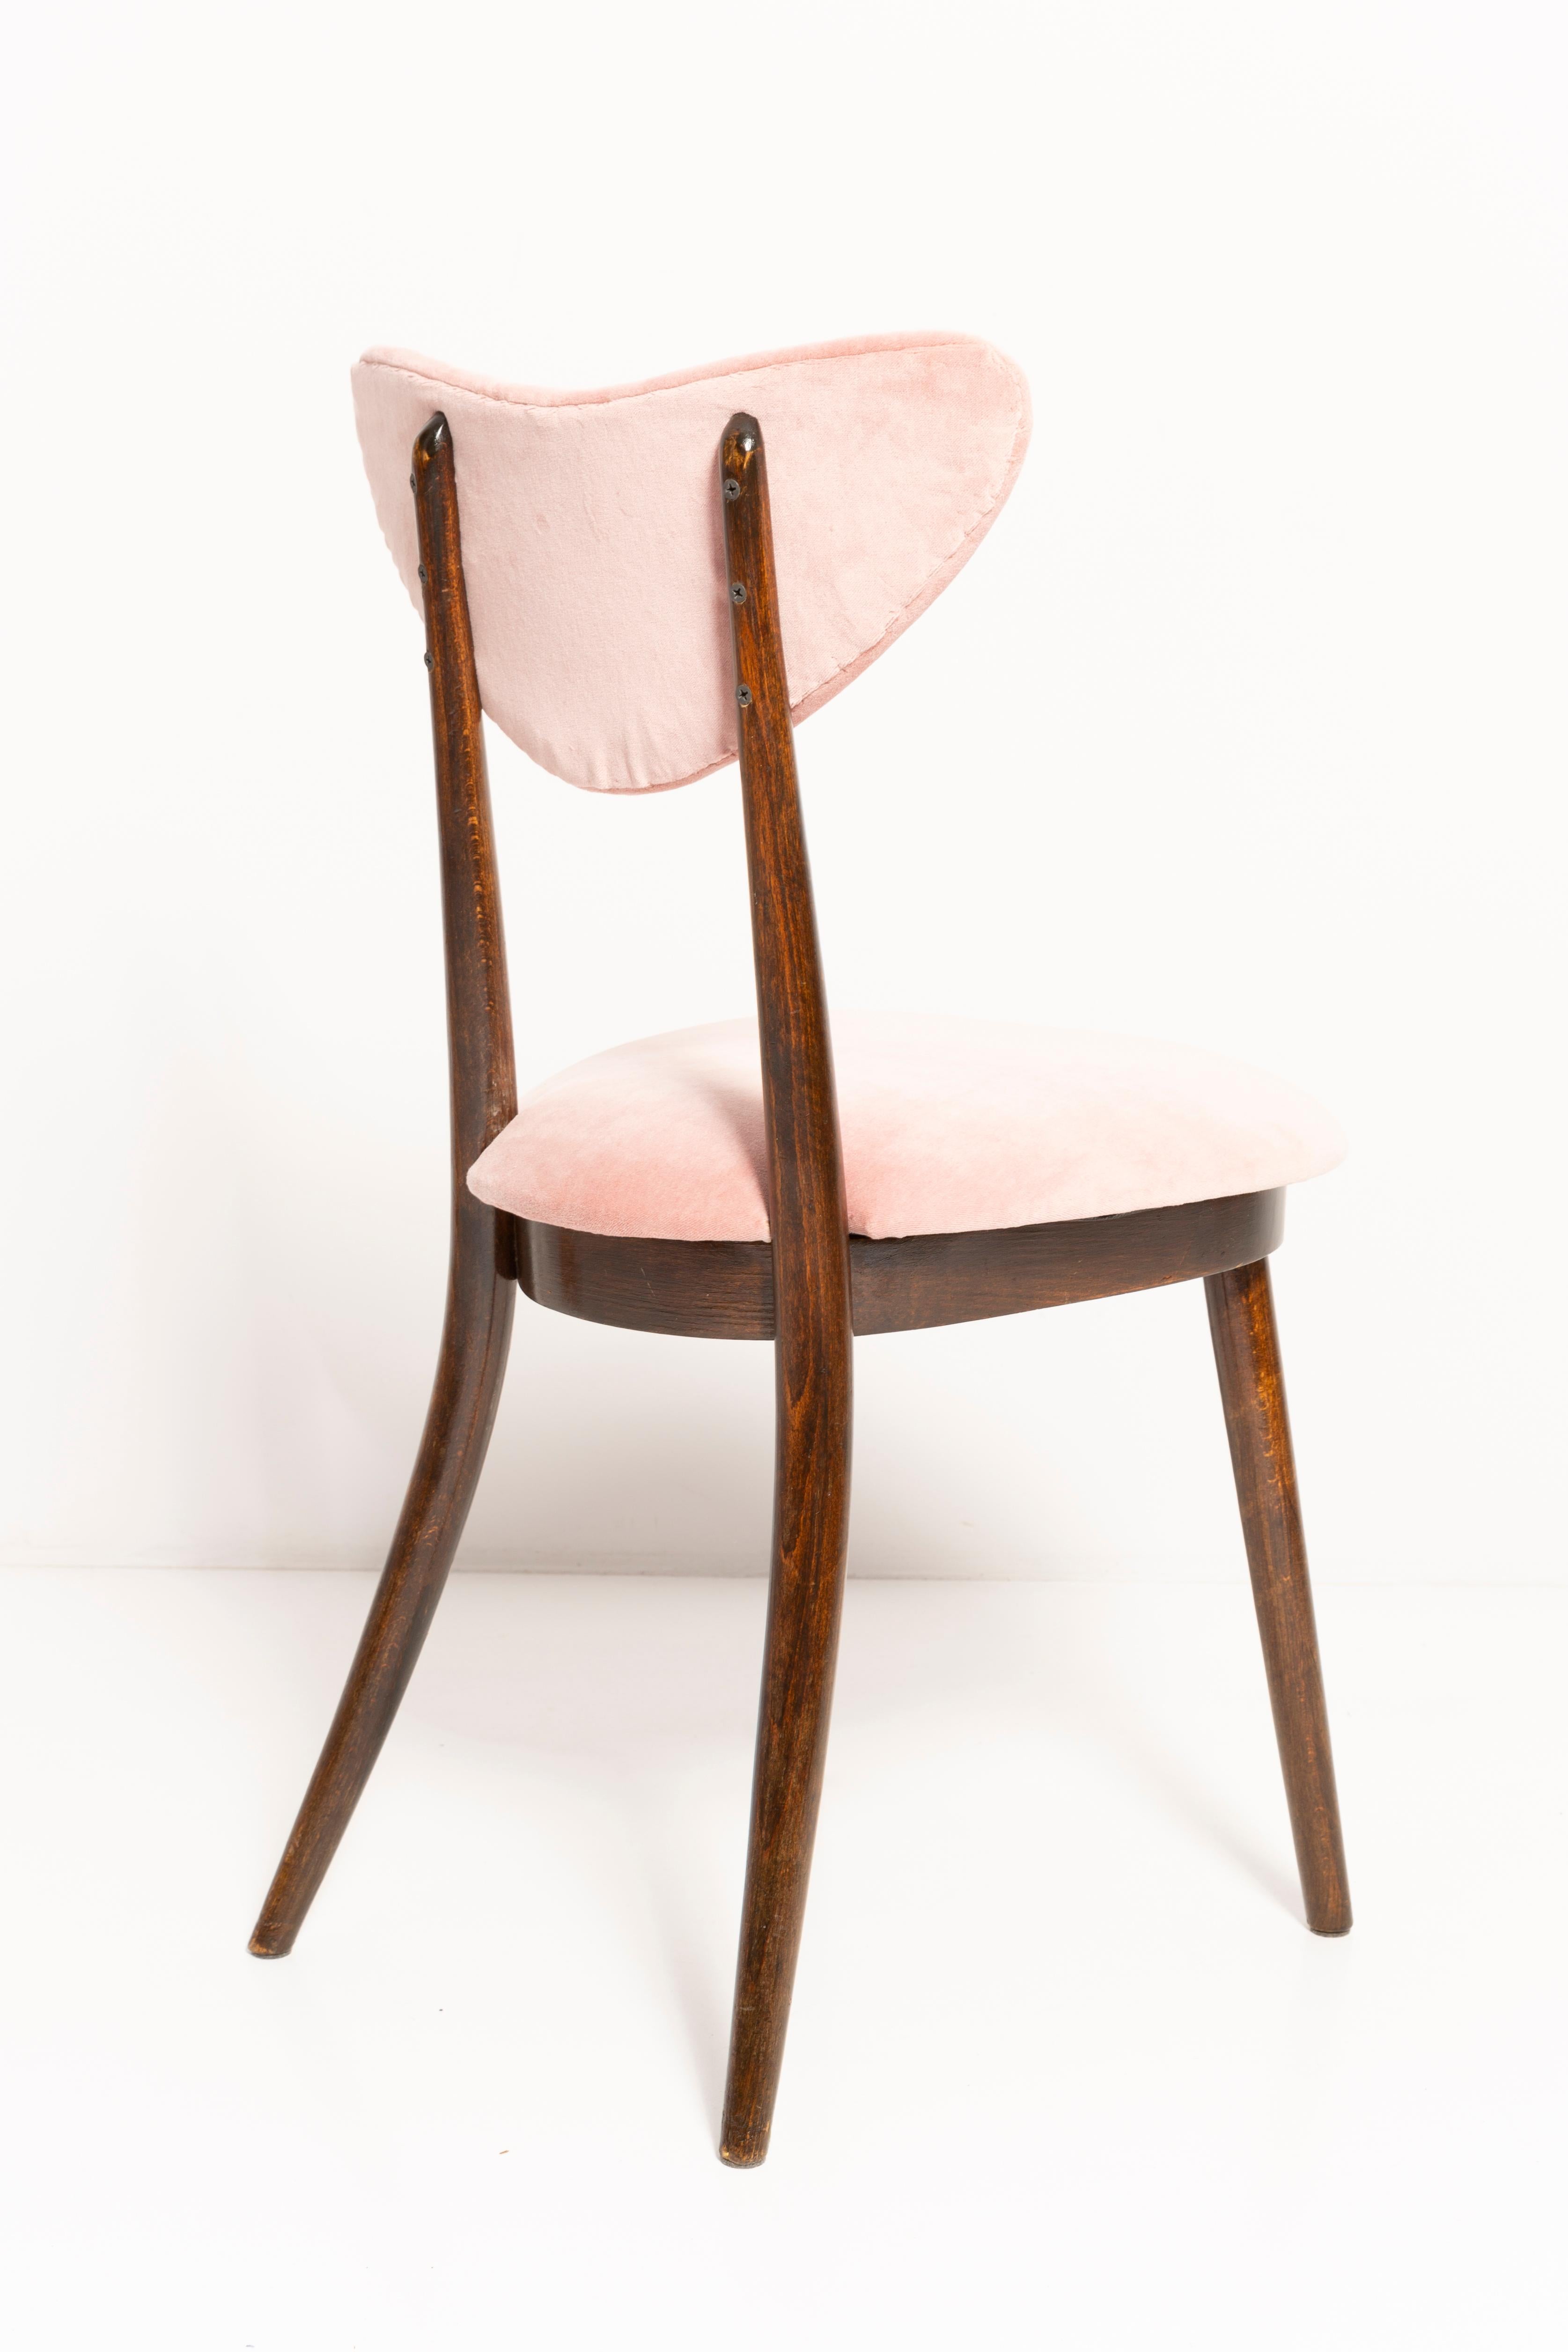 Set of Four Mid-Century Pink Cotton-Velvet Heart Chairs, Europe, 1960s For Sale 2